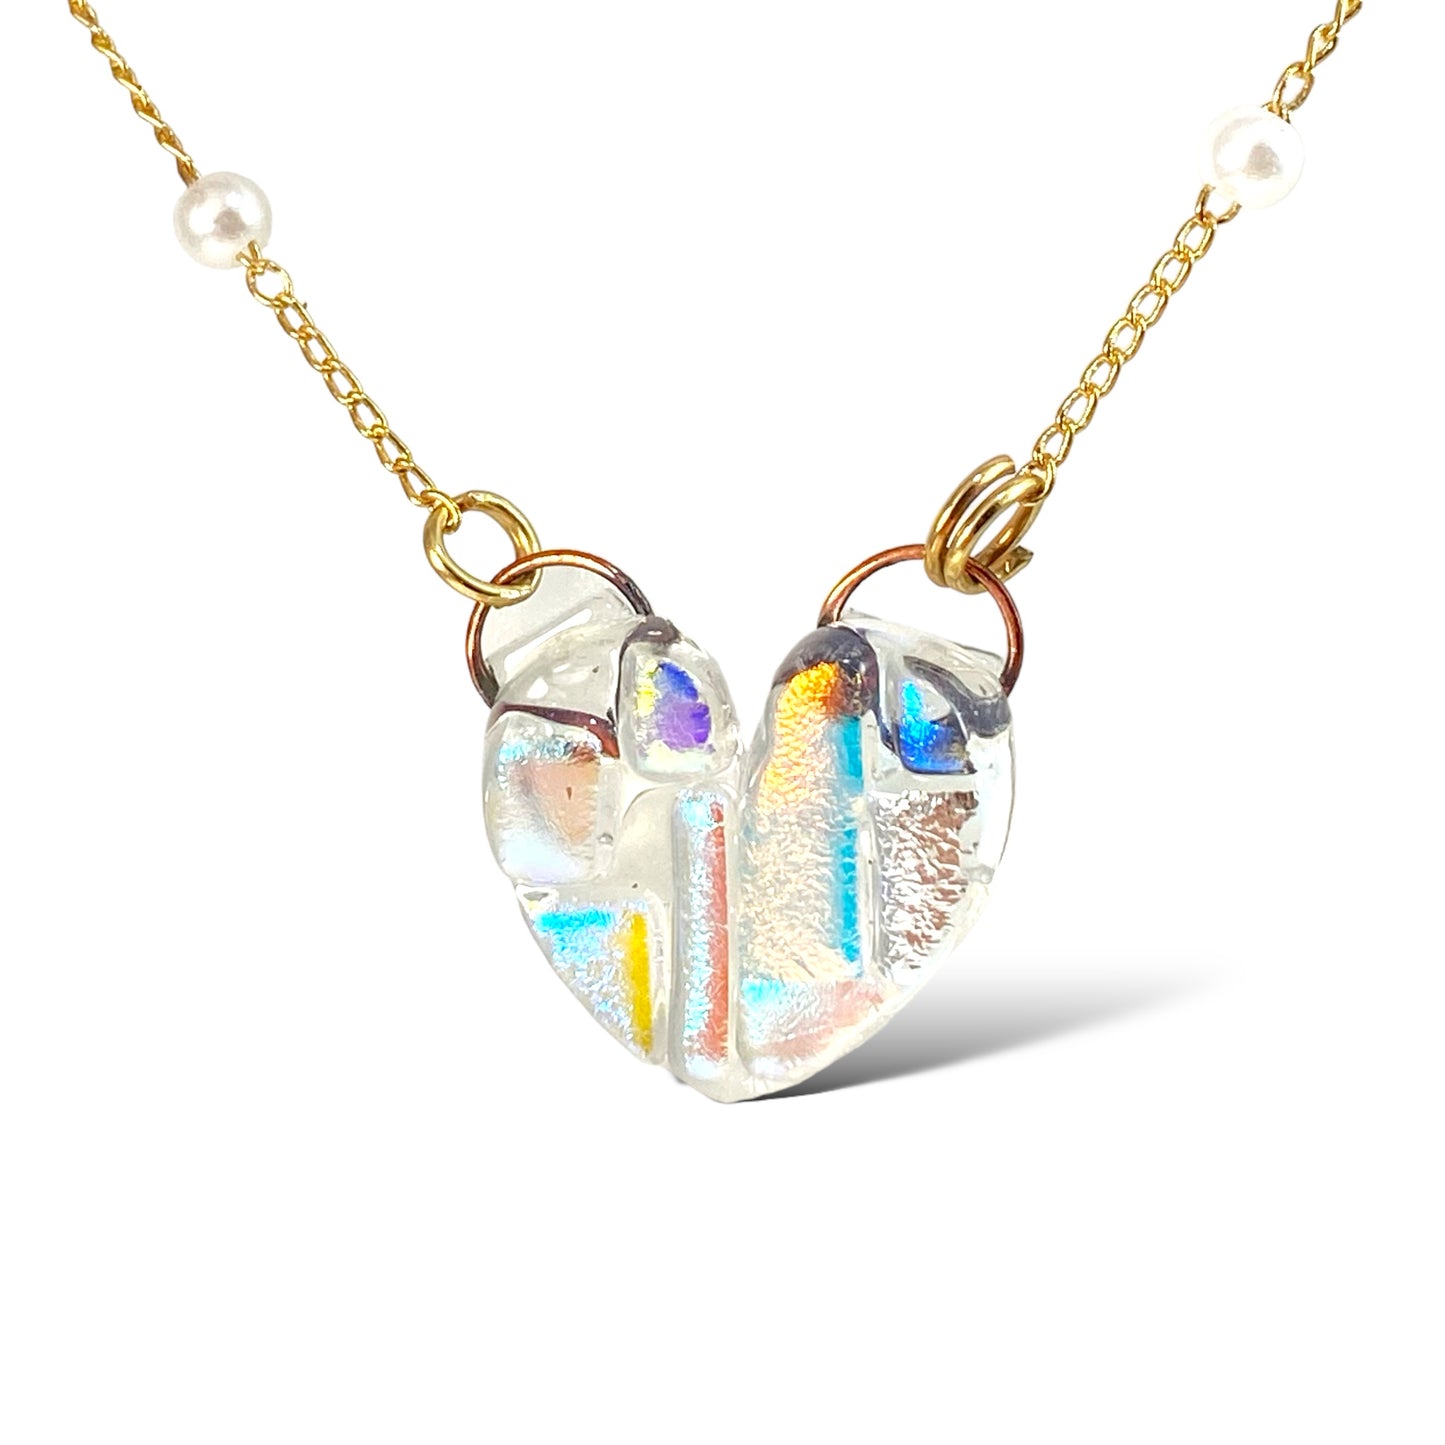 Dichroic Glass Heart Necklace (a)